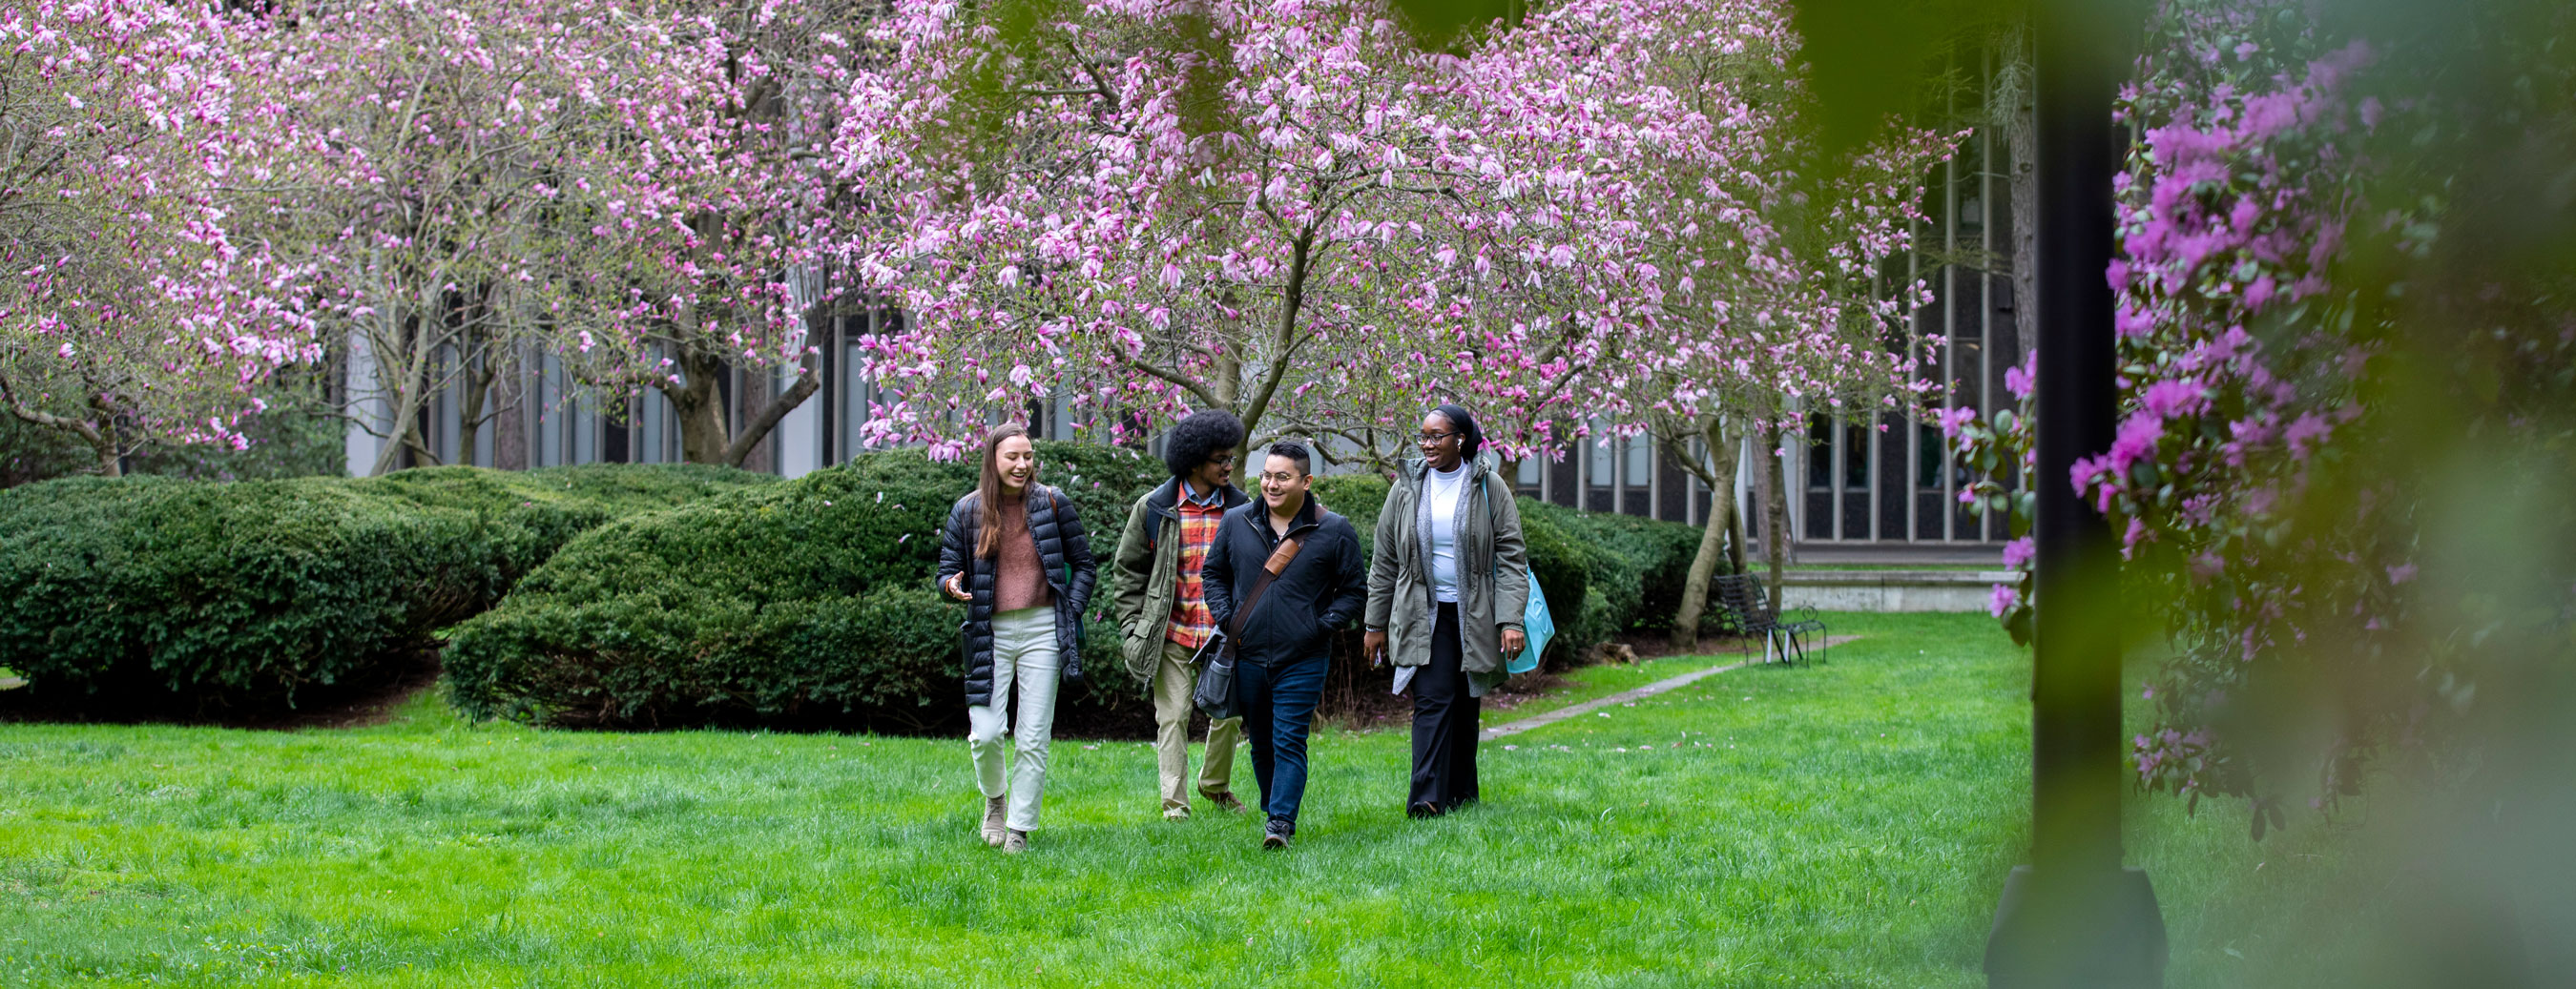 Four students smile and talk as they walk through a grassy flower garden on campus.